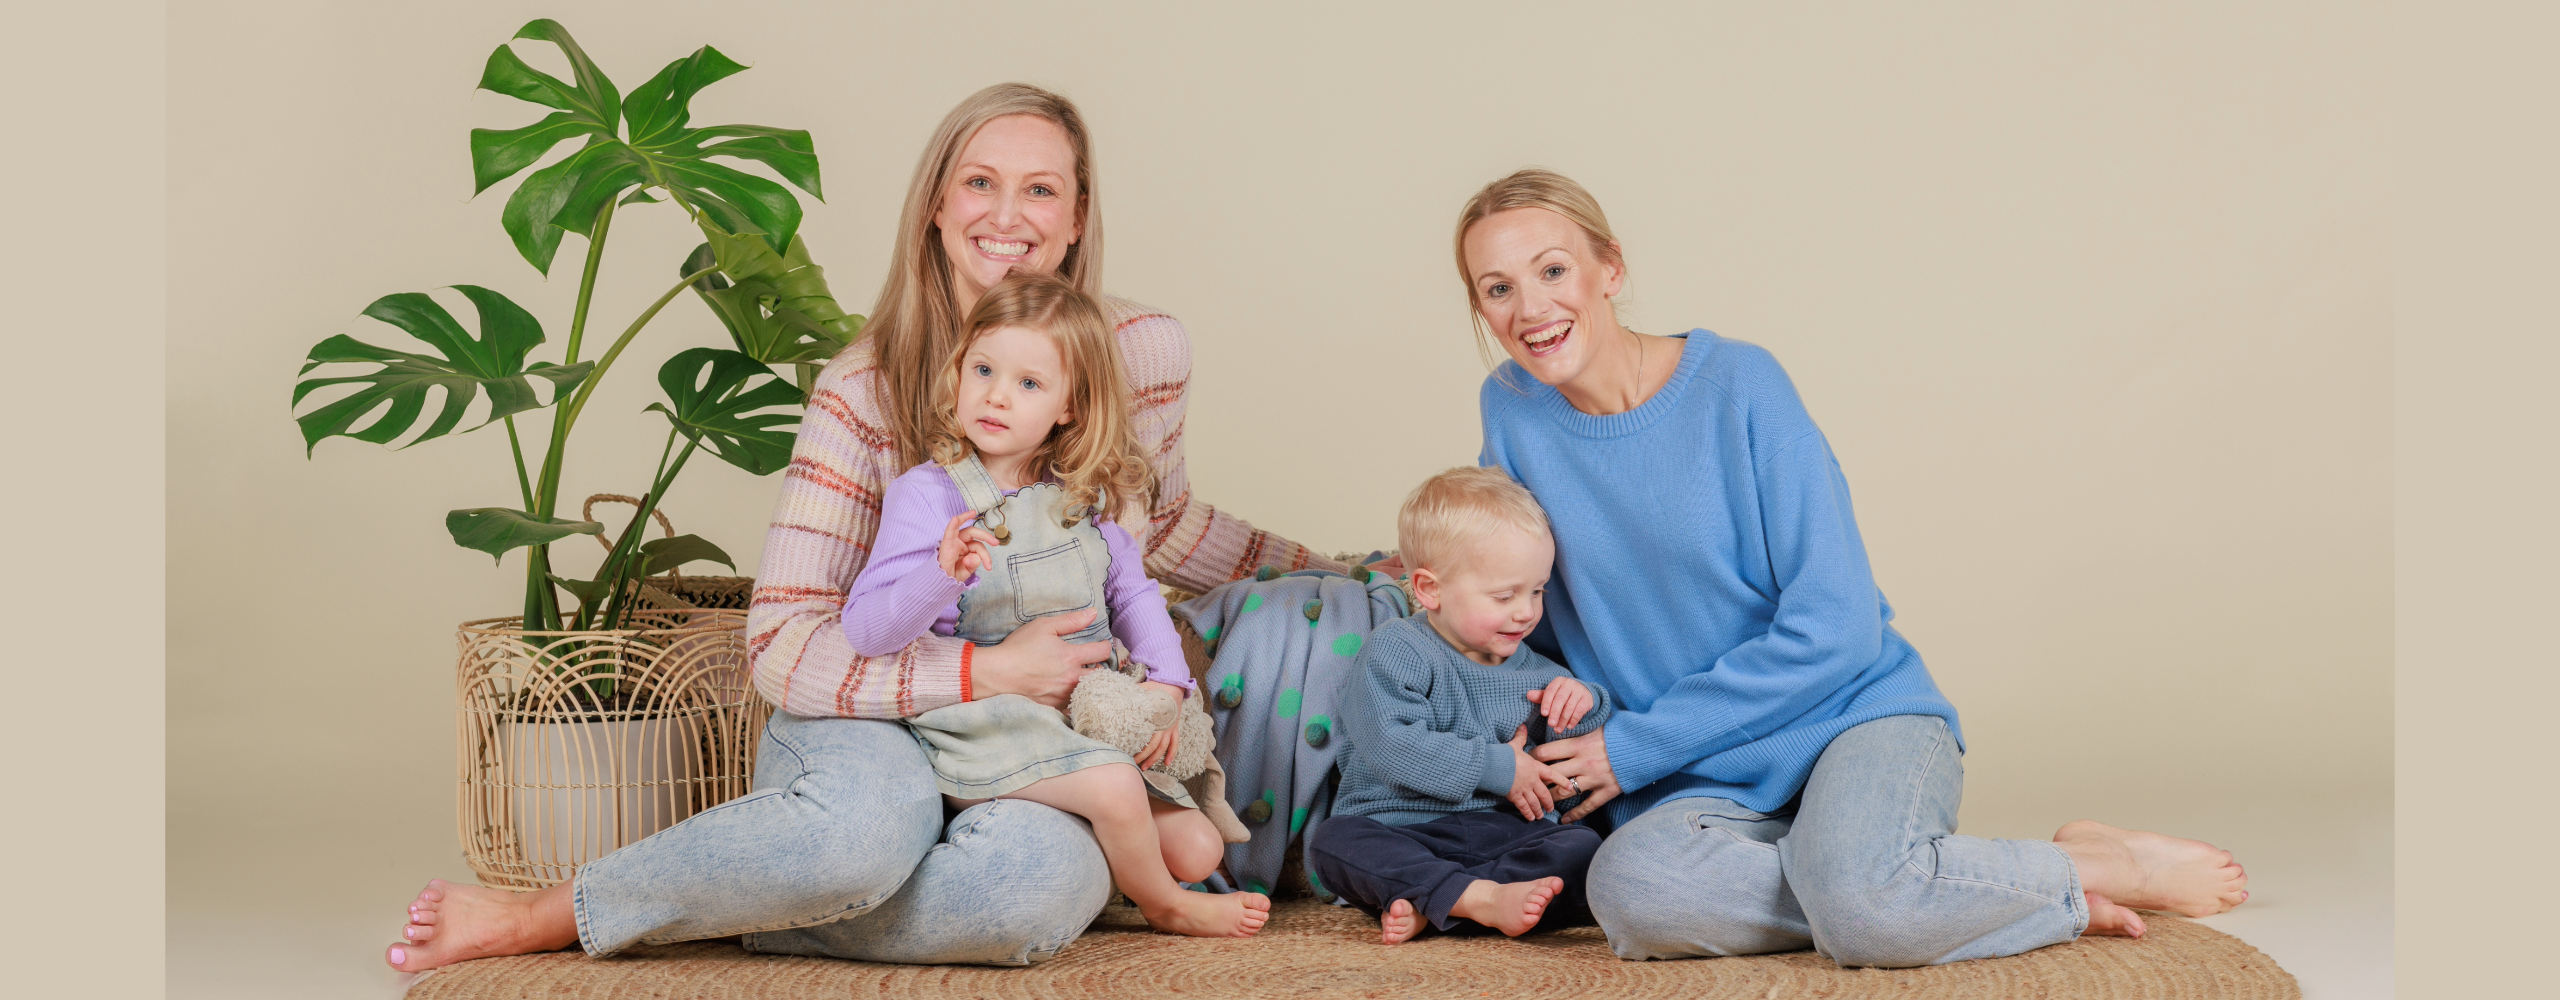 Audrey and Alfie Founders - Carly & Zoe, with their children who inspired the brand, Audrey and Alfie